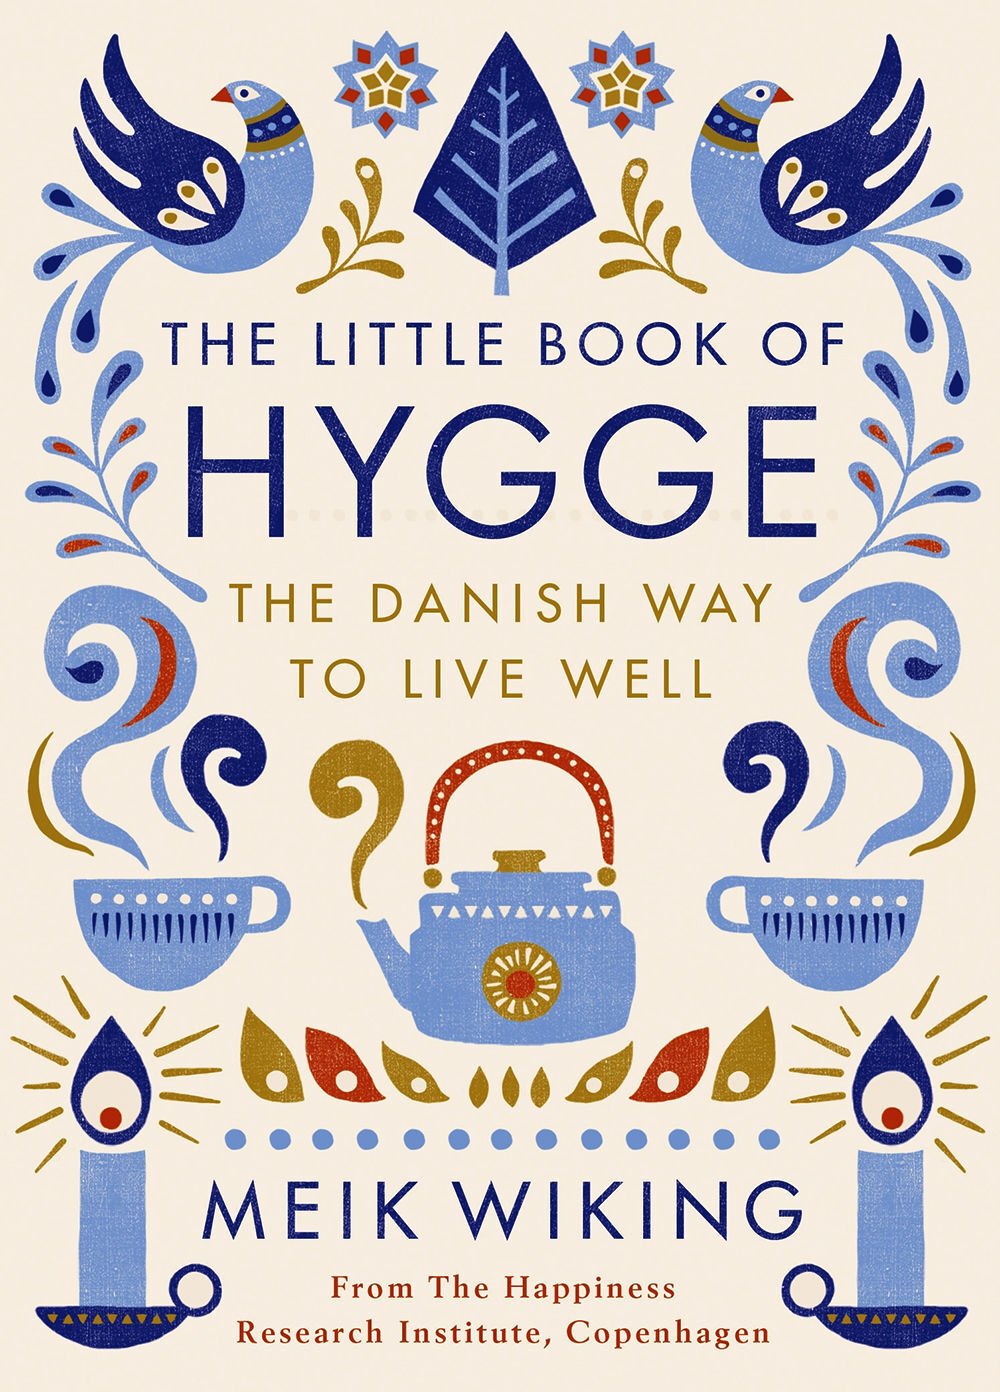 The Year of Hygge, the Danish Obsession with Getting Cozy